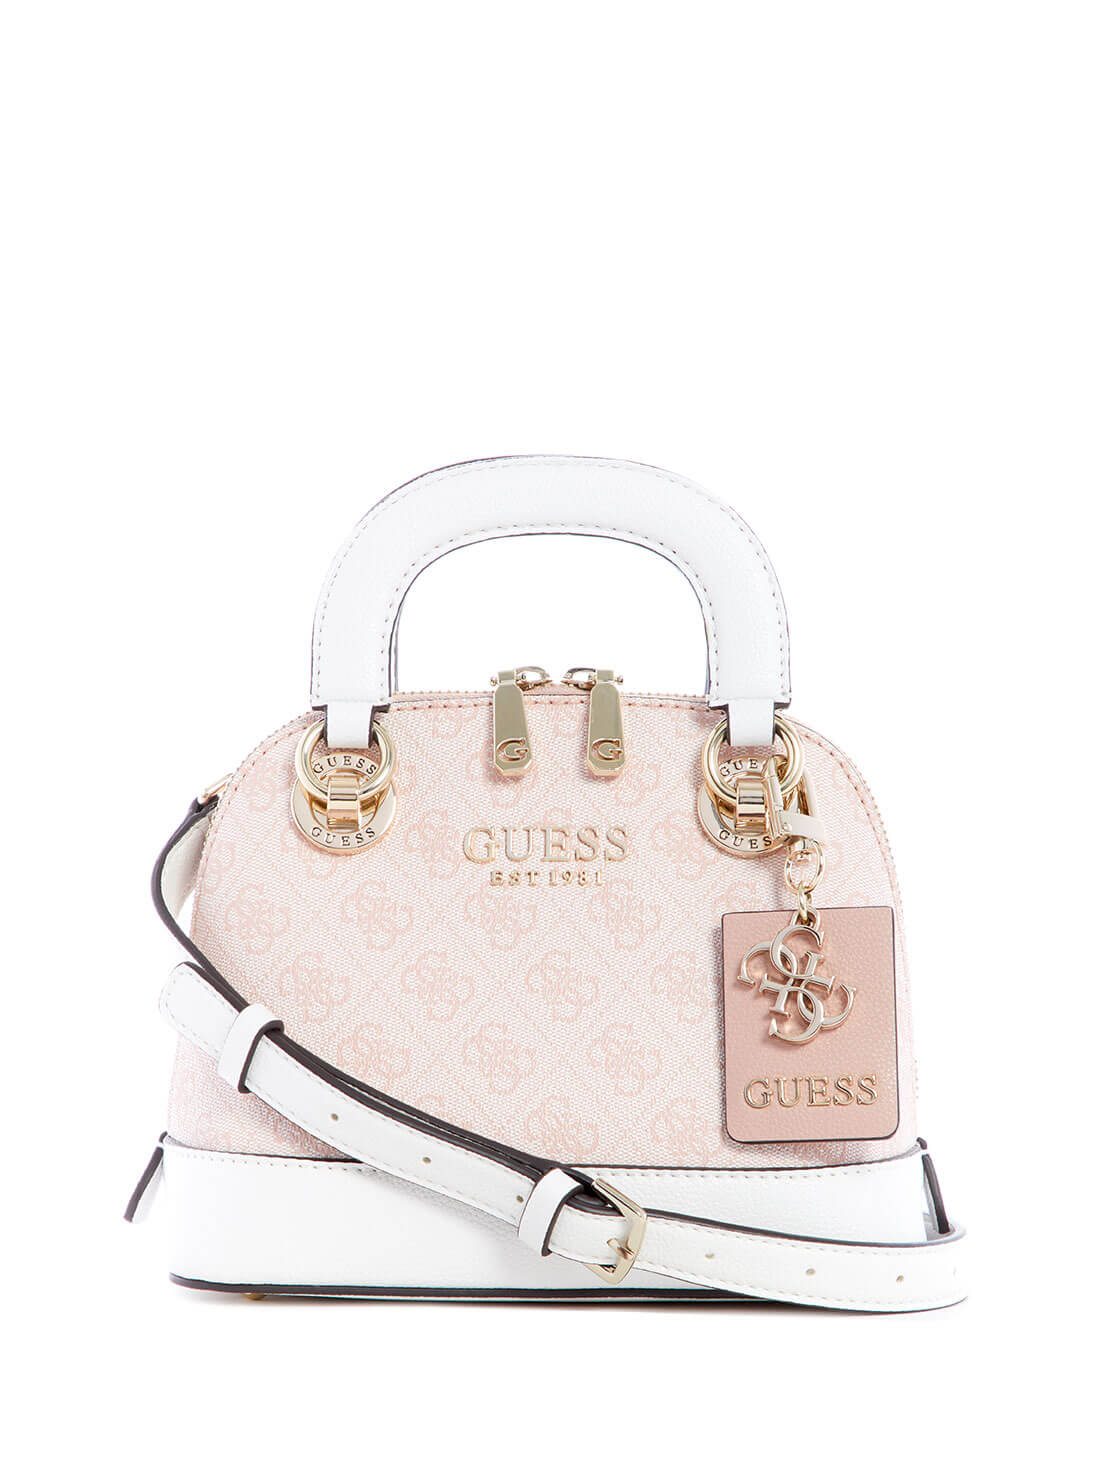 GUESS Womens Pink White Cathleen Small Dome Satchel SG773705 Front View